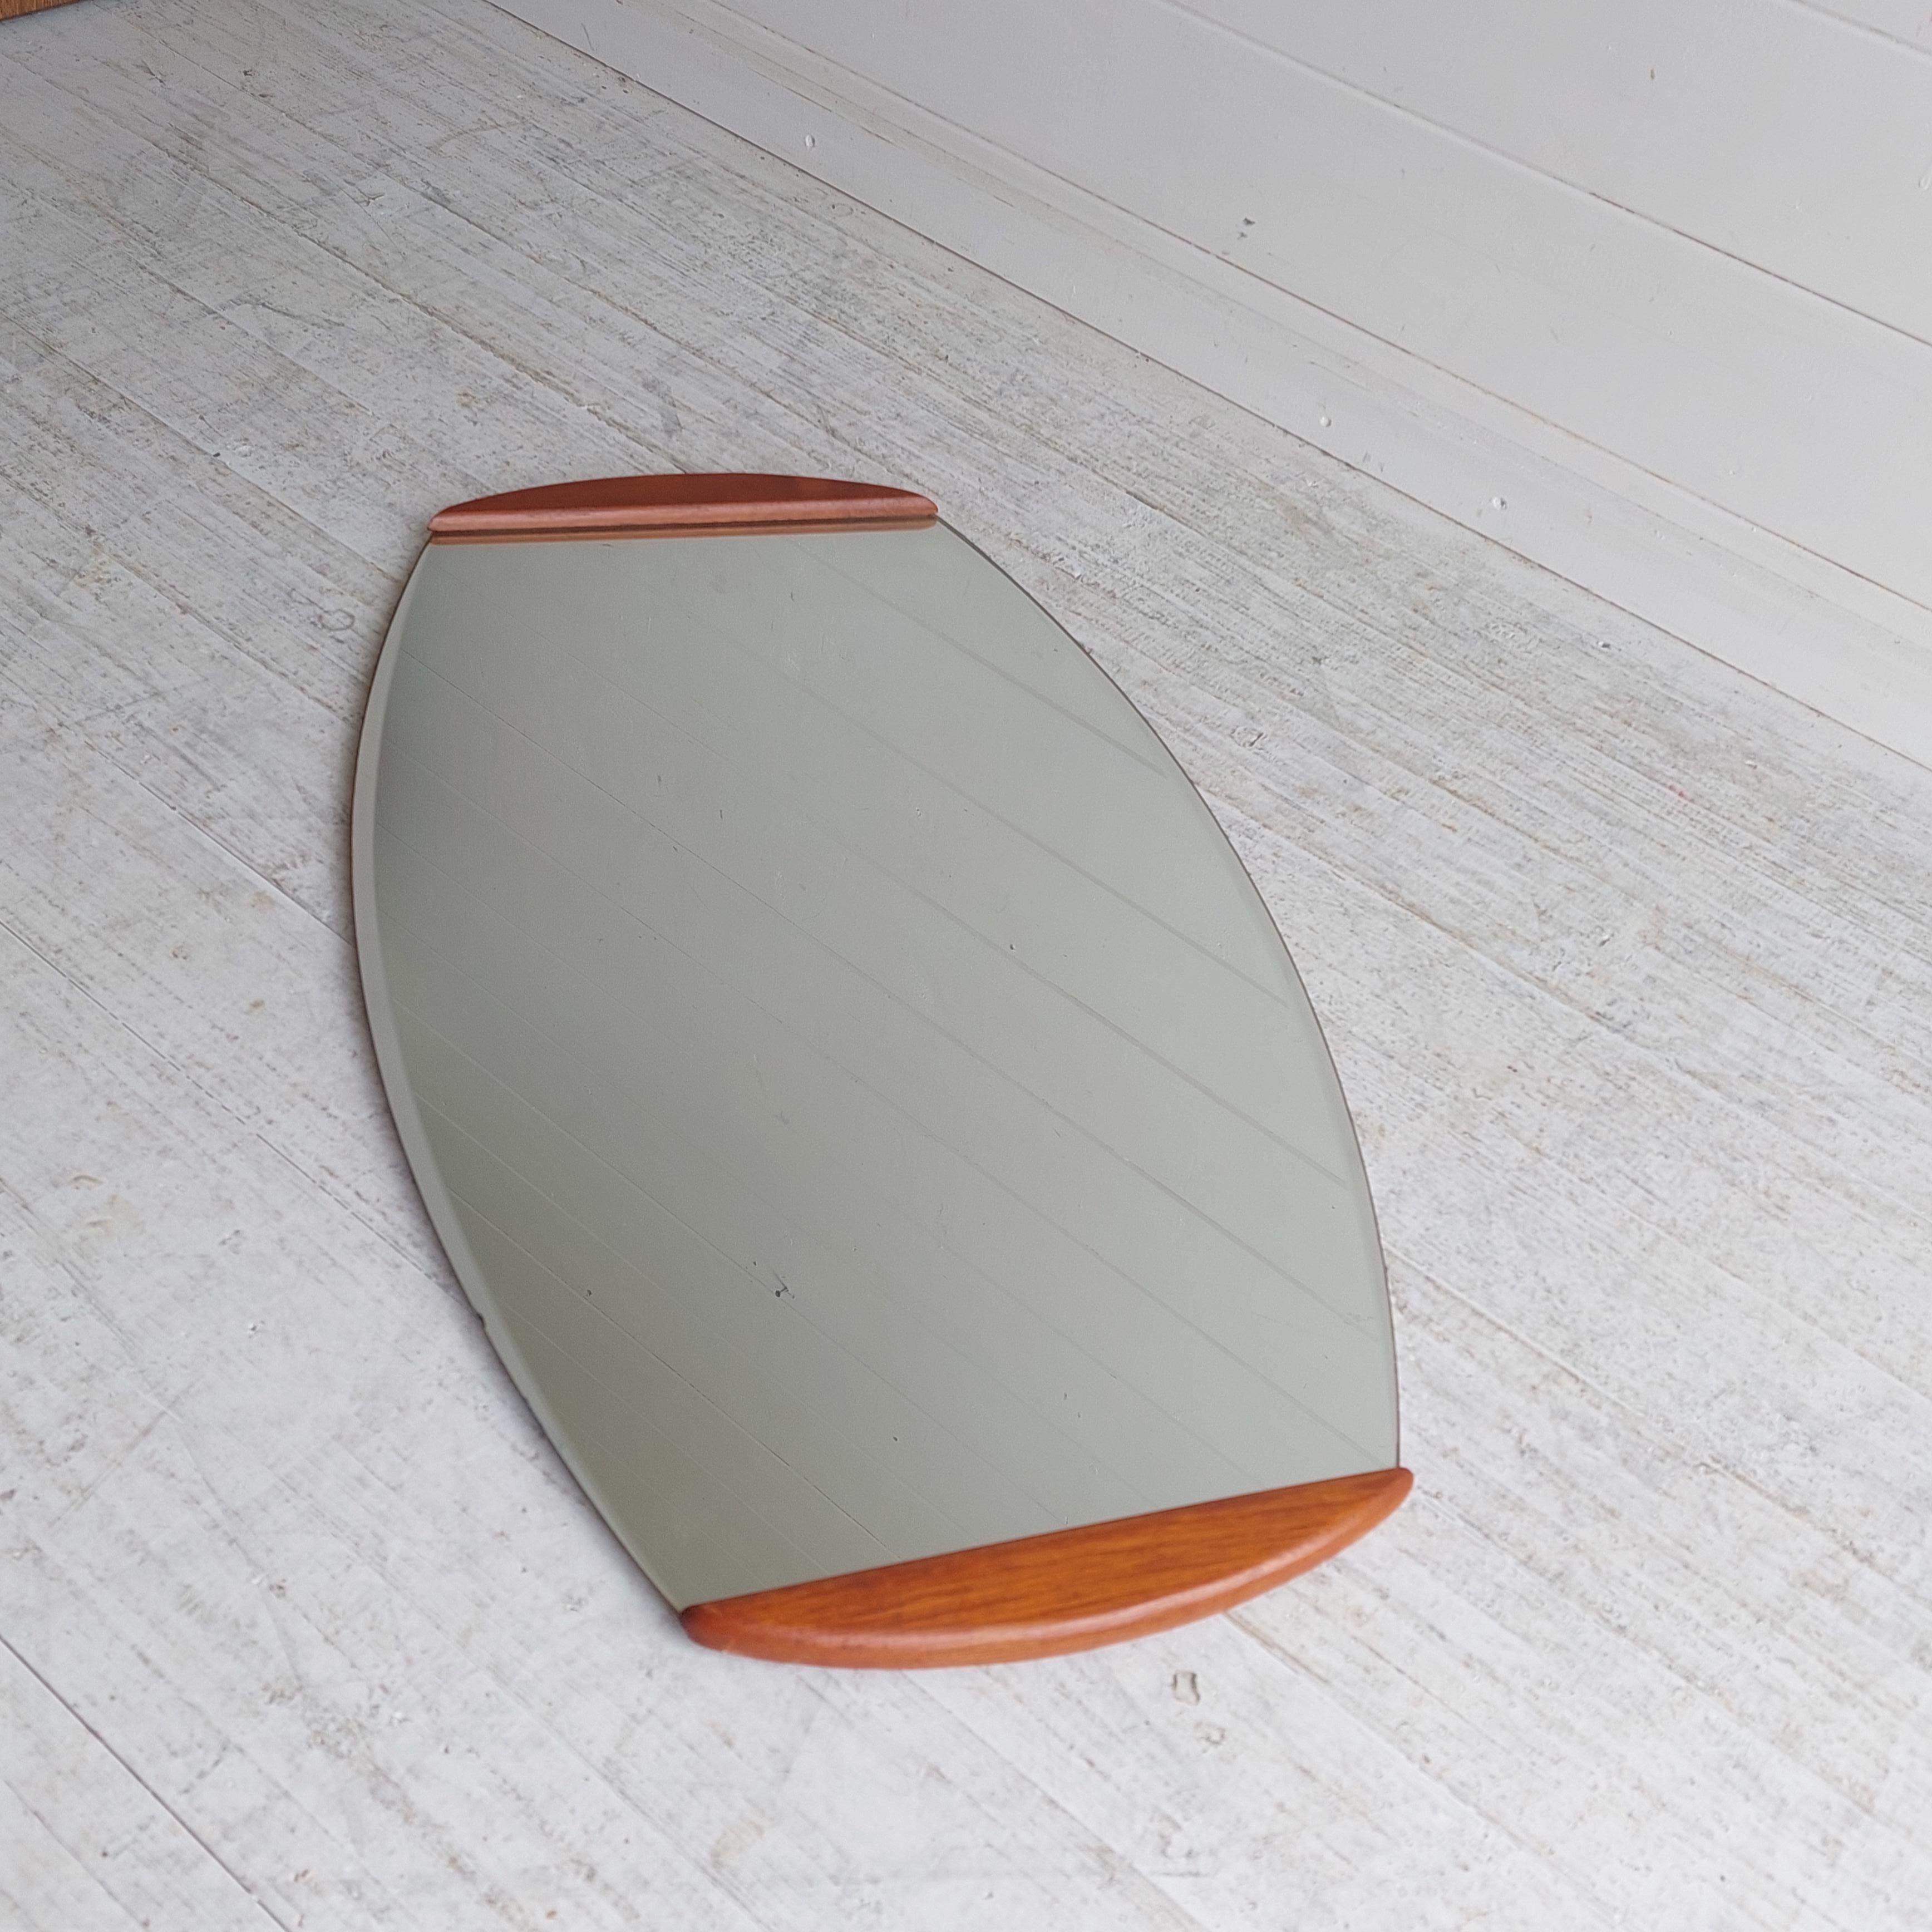 Teak framed Wall Mirror Designed and Manufactured most probably in Denmark in the 1960s

Stunning Elliptic Wall Mirror that would work in any room in your home, 
Magnificent oval beveled mirror with 2 teak parts at the top and bottom
A model dating